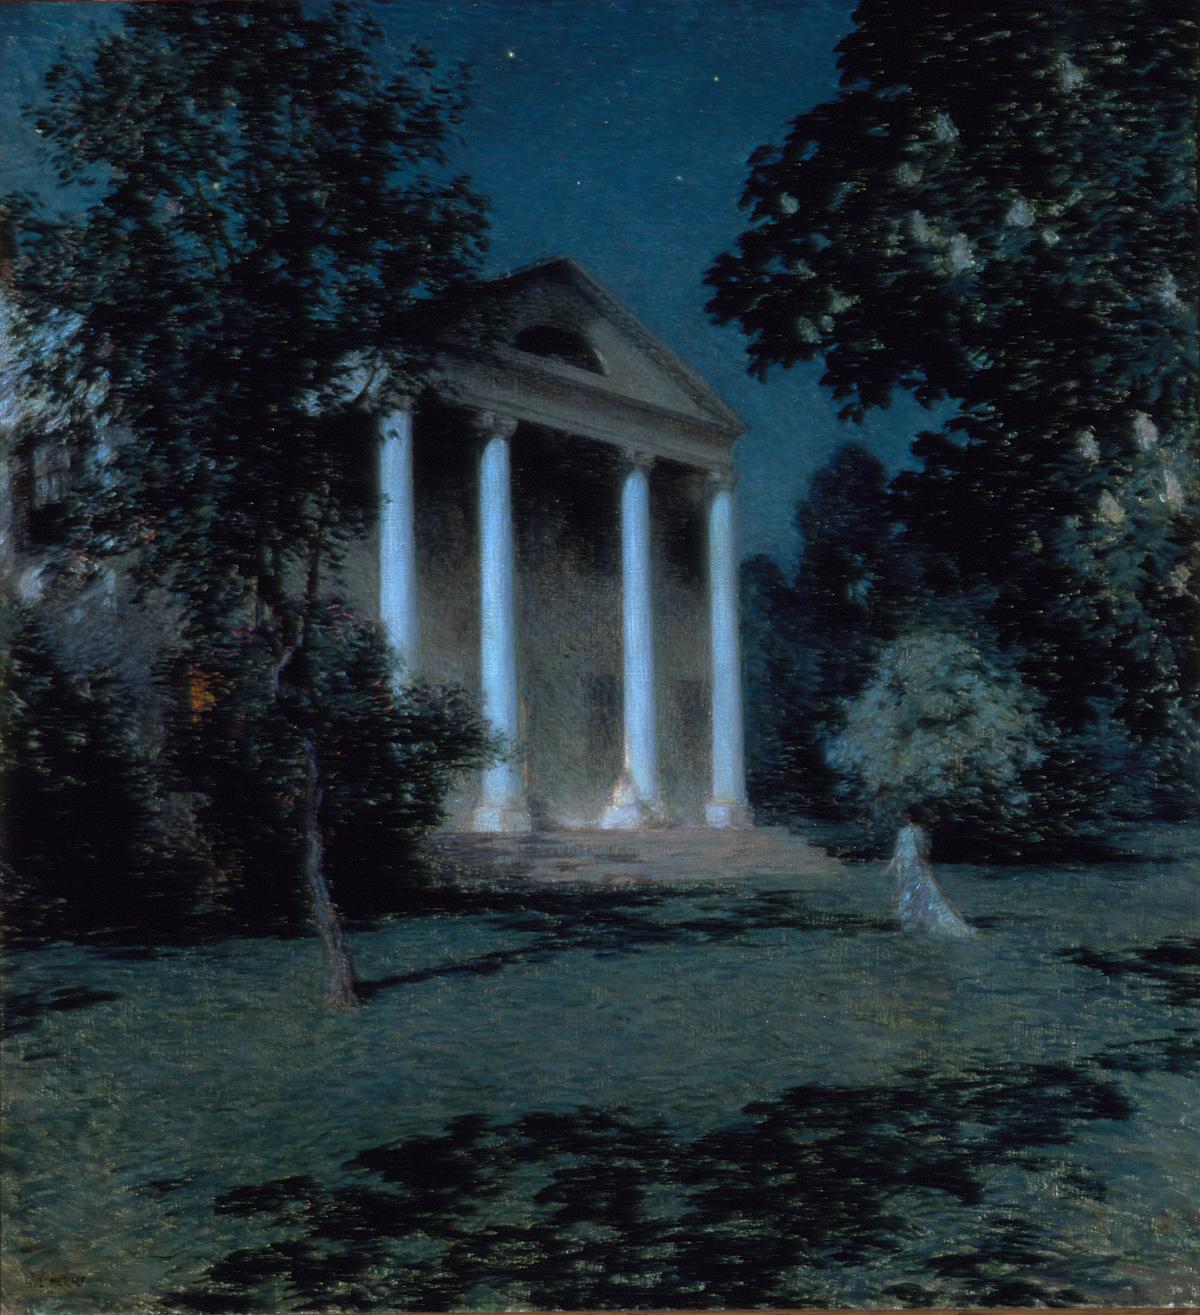 Painting of a house with columns at night